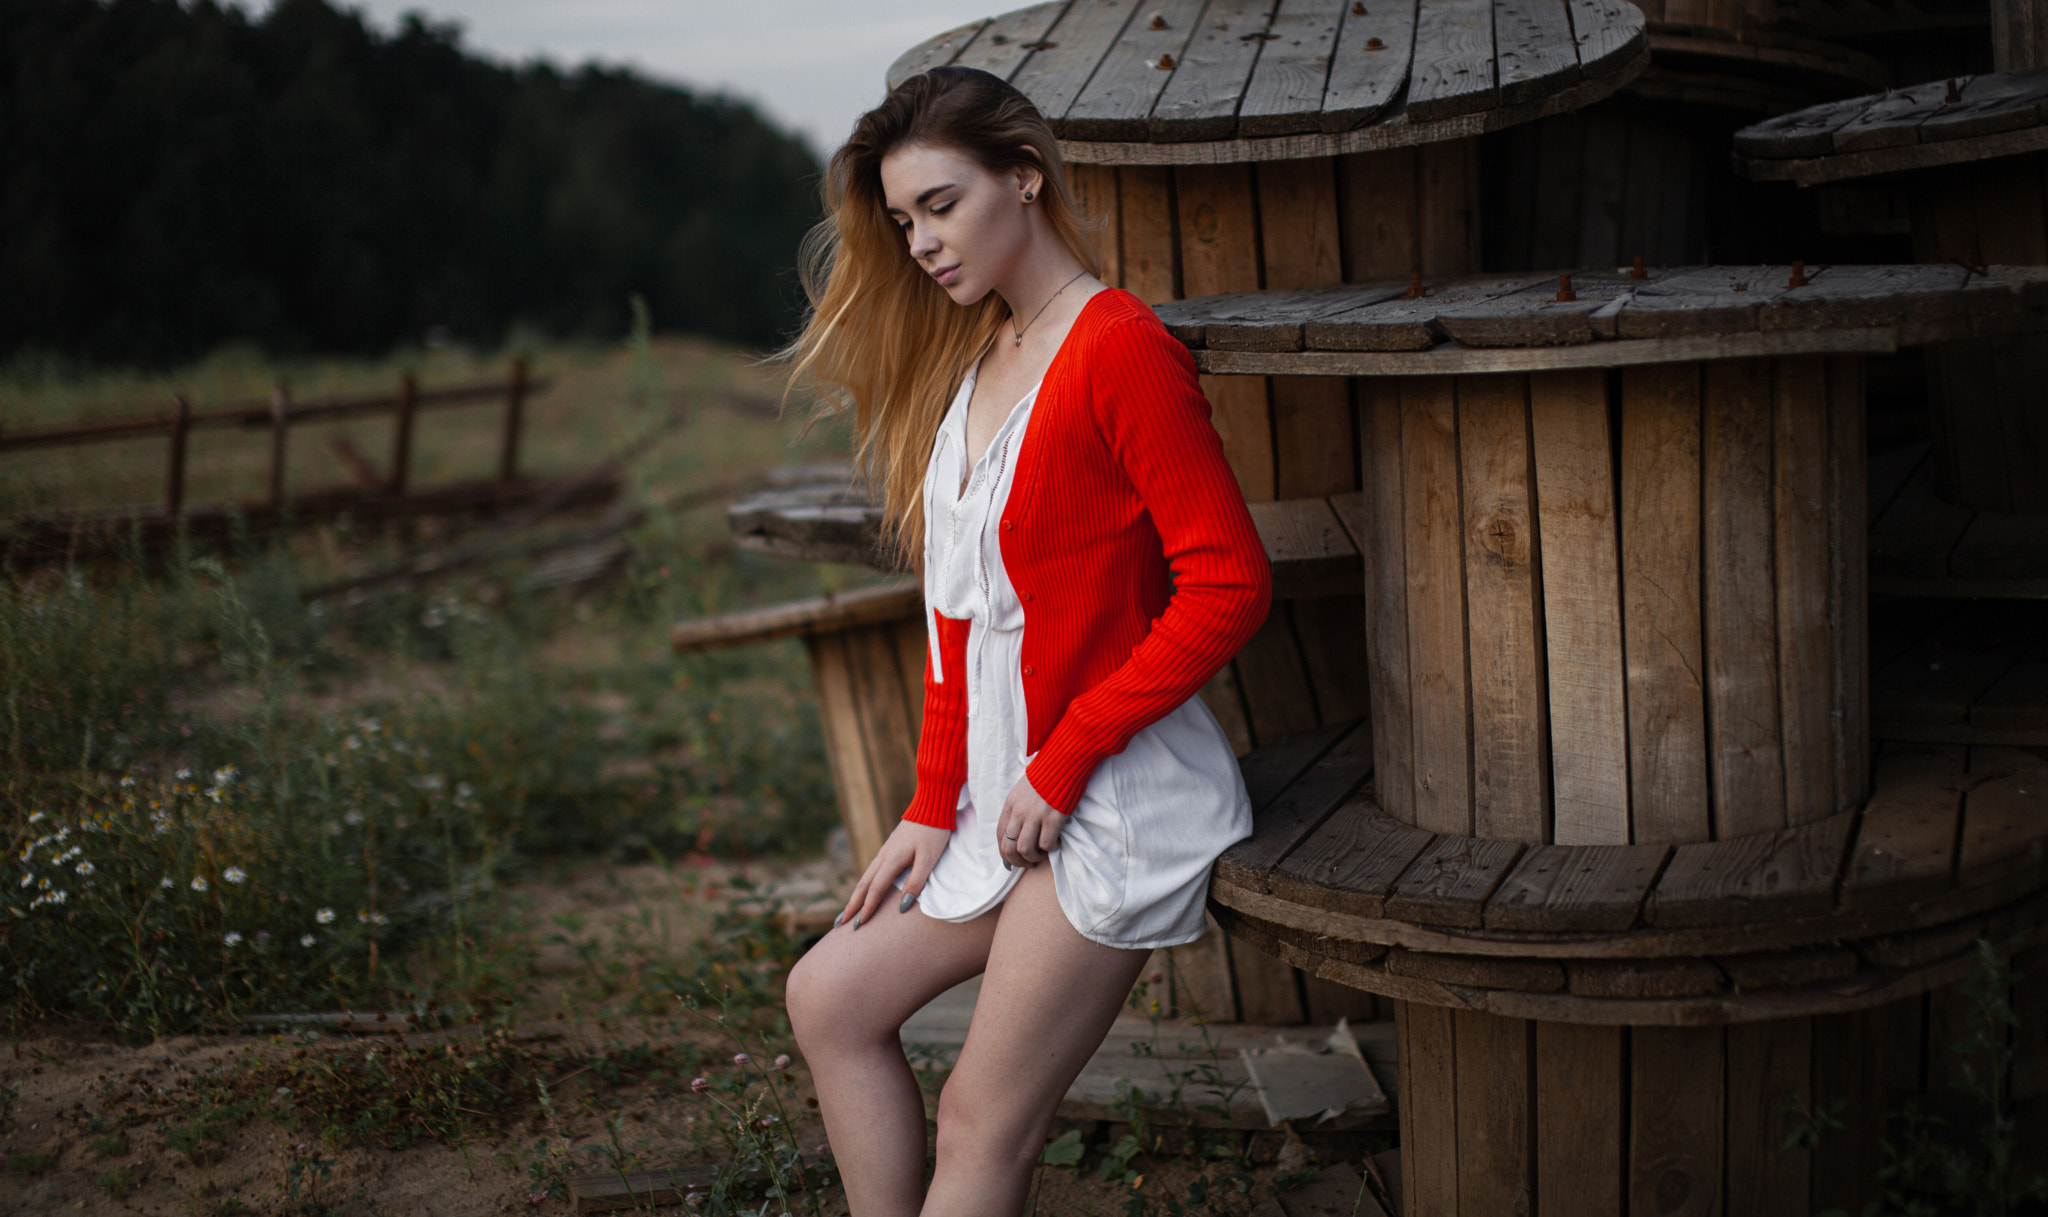 Andrey Frolov Women Ombre Hair Long Hair Red Clothing White Clothing Wooden Surface Outdoors Wind 2048x1217